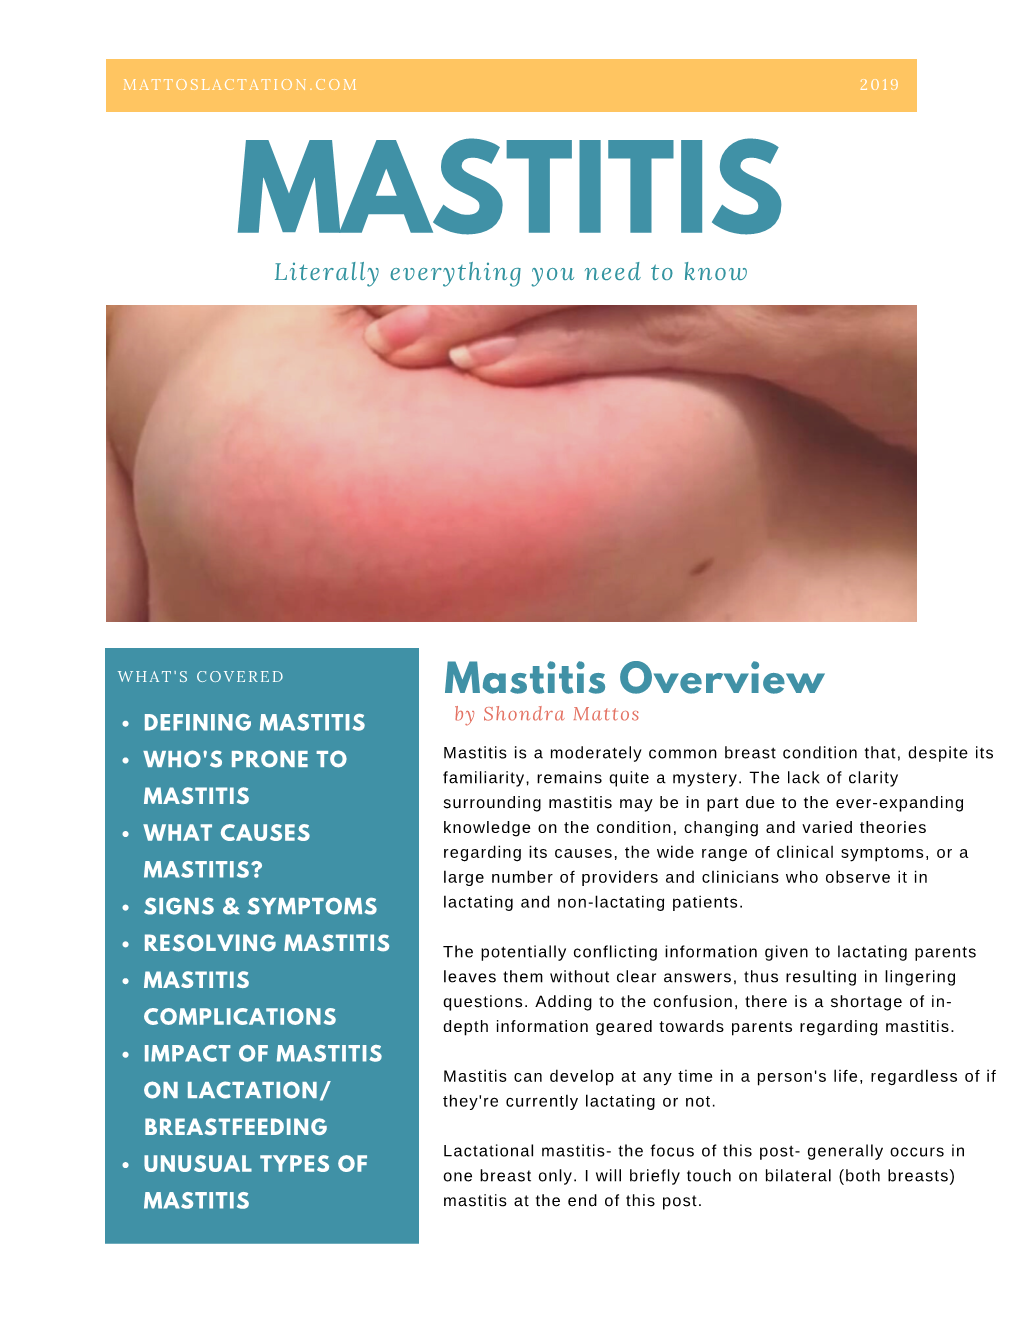 MASTITIS Literally Everything You Need to Know